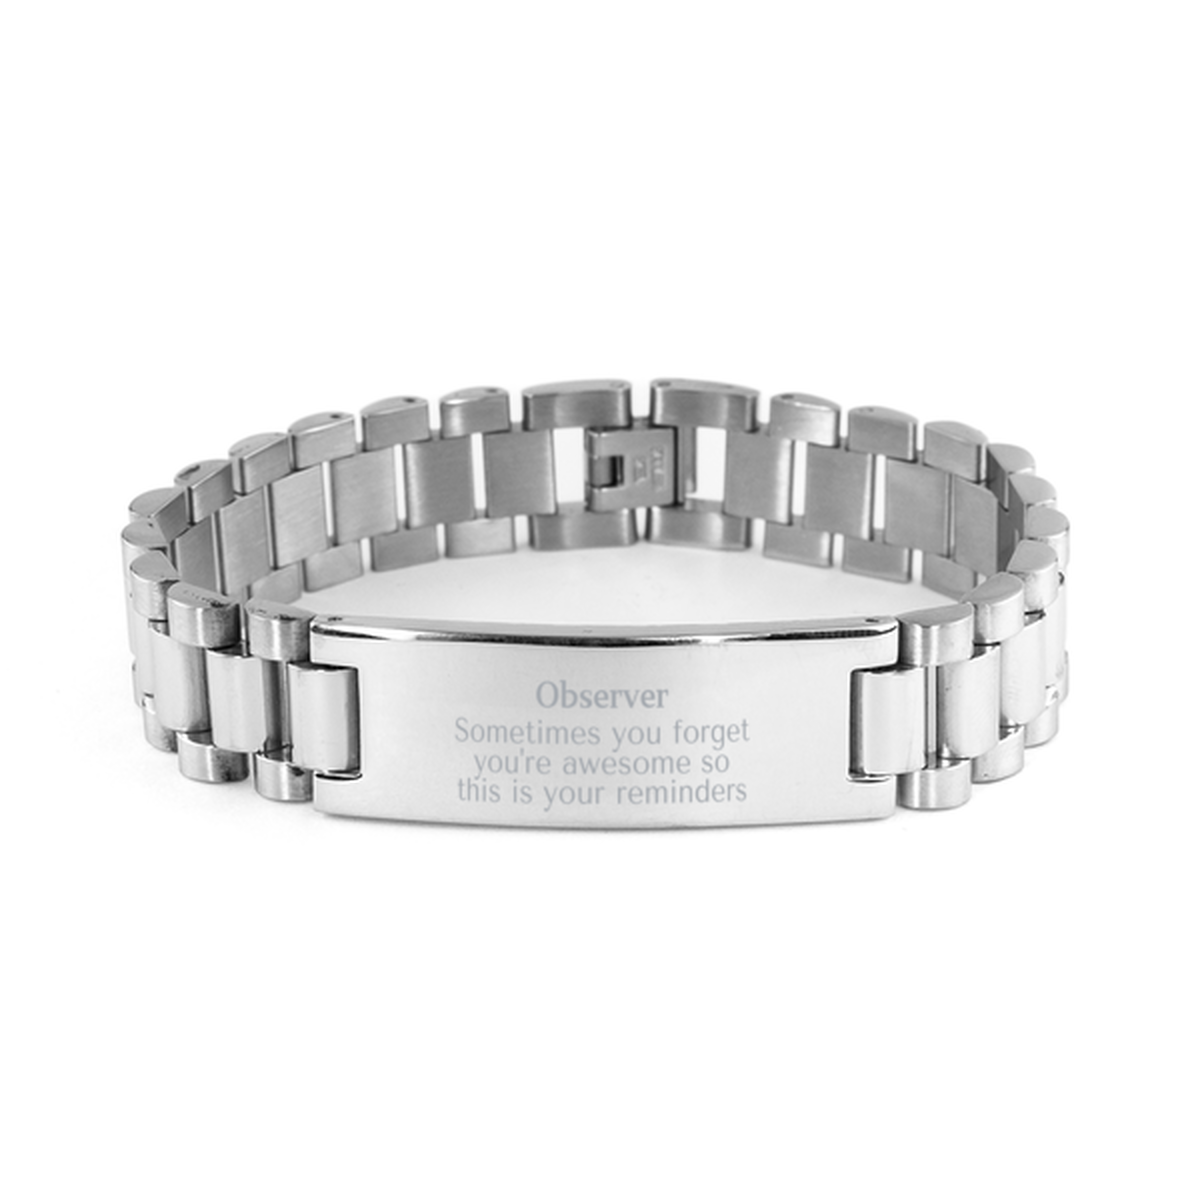 Sentimental Observer Ladder Stainless Steel Bracelet, Observer Sometimes you forget you're awesome so this is your reminders, Graduation Christmas Birthday Gifts for Observer, Men, Women, Coworkers